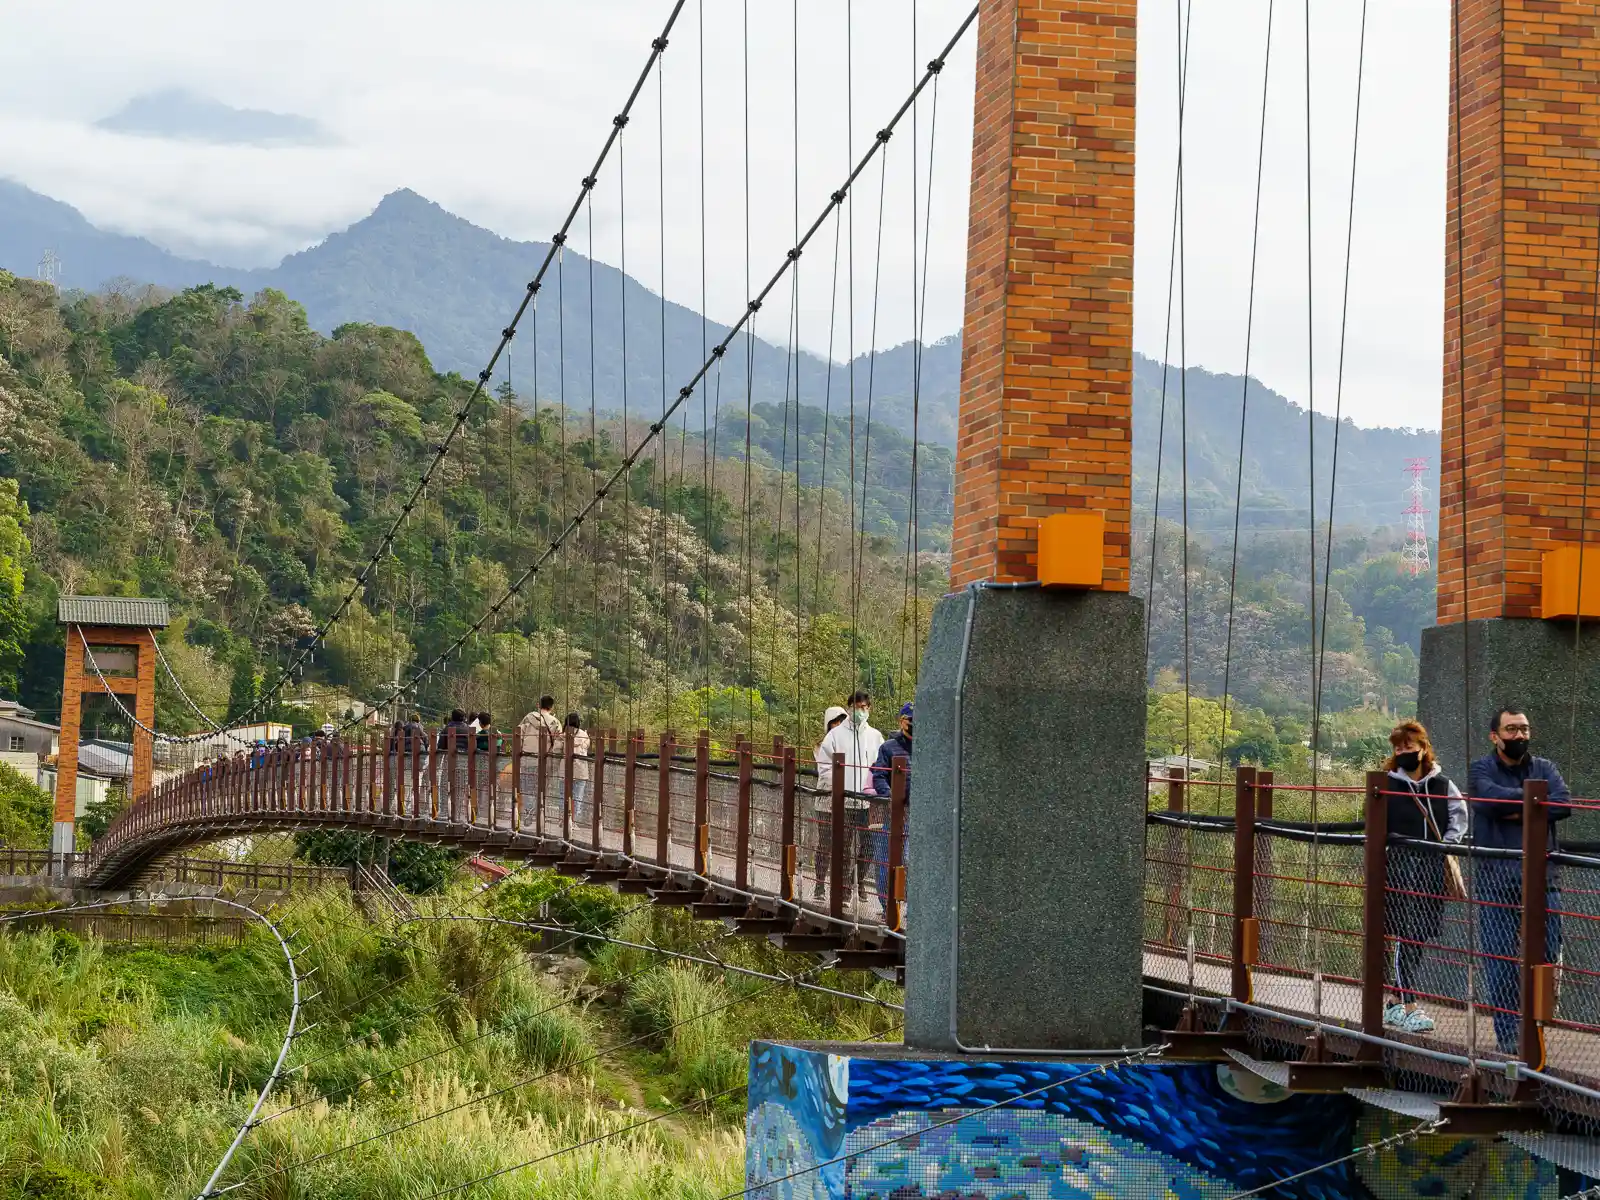 People walk over the Kangji Suspension Bridge; buildings and mountains can be seen in the distance.